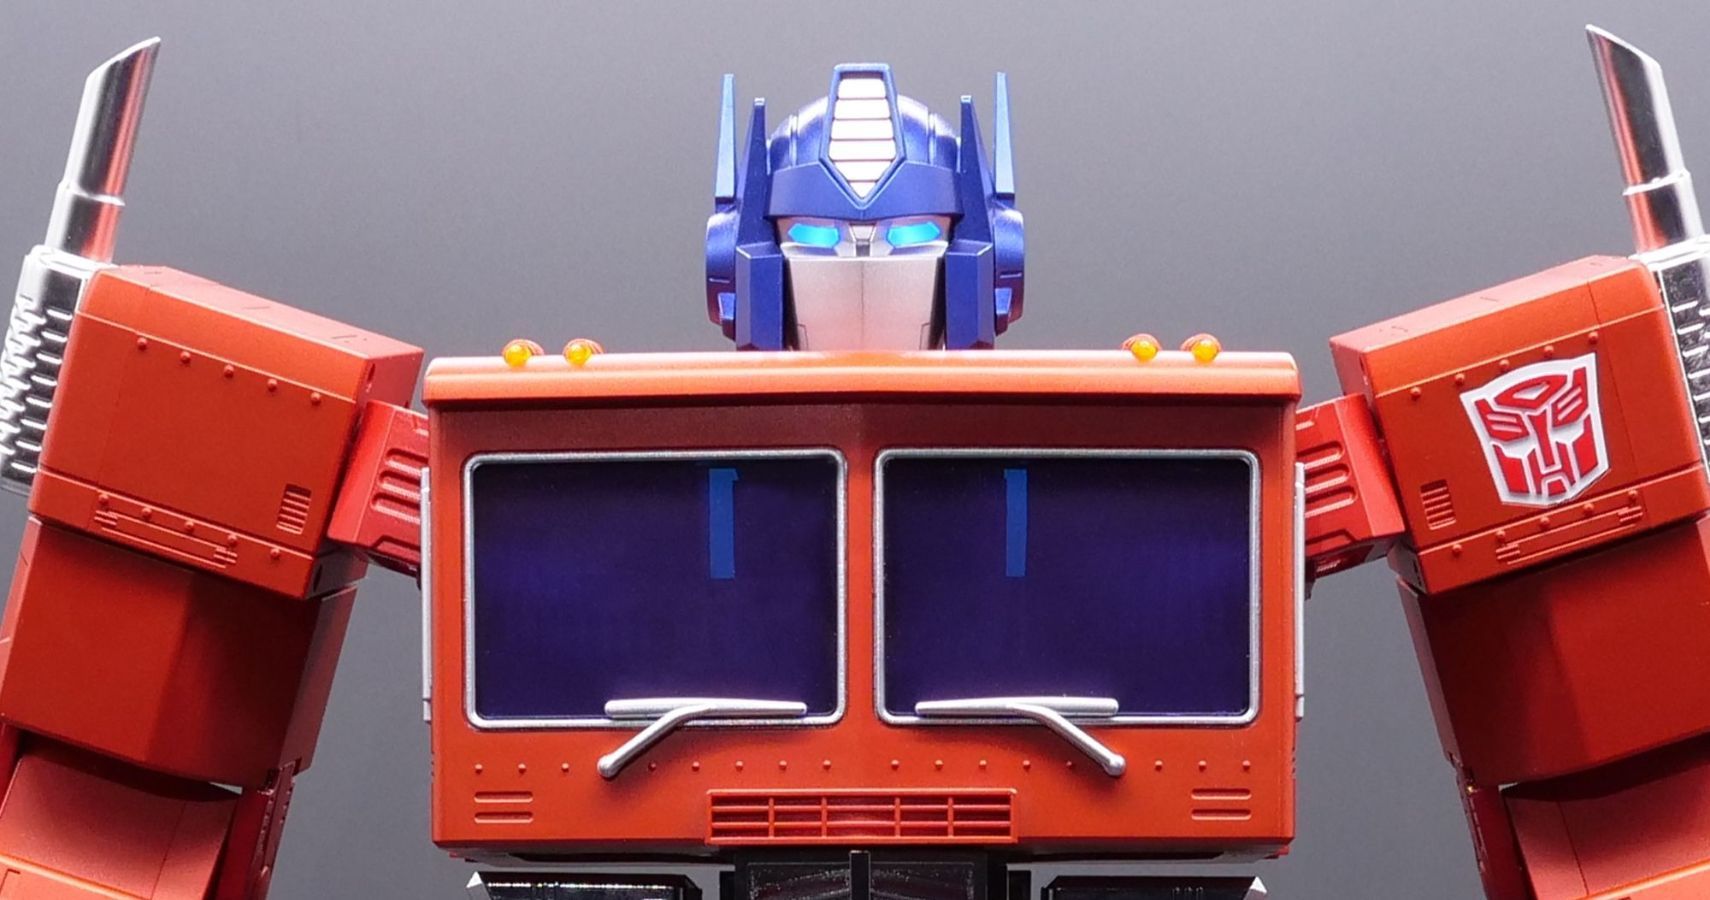 This $700 Optimus Prime Robot Can Transform Using Voice Commands